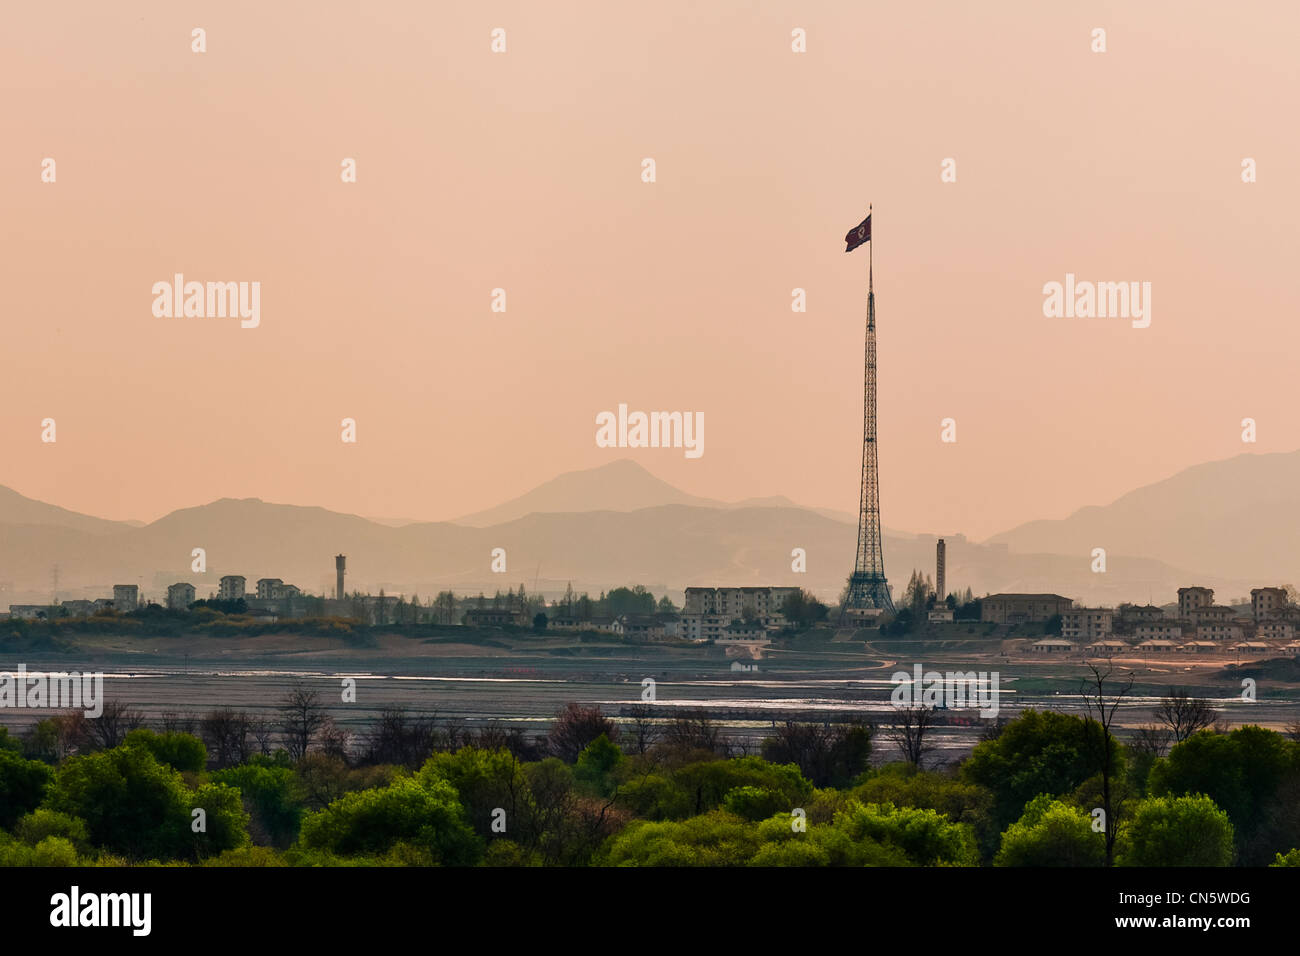 South Korea, Gyeonggi Province, Panmunjom, Joint Security Area (JSA), view of Kijong-Dong where there is a huge pole on top of Stock Photo